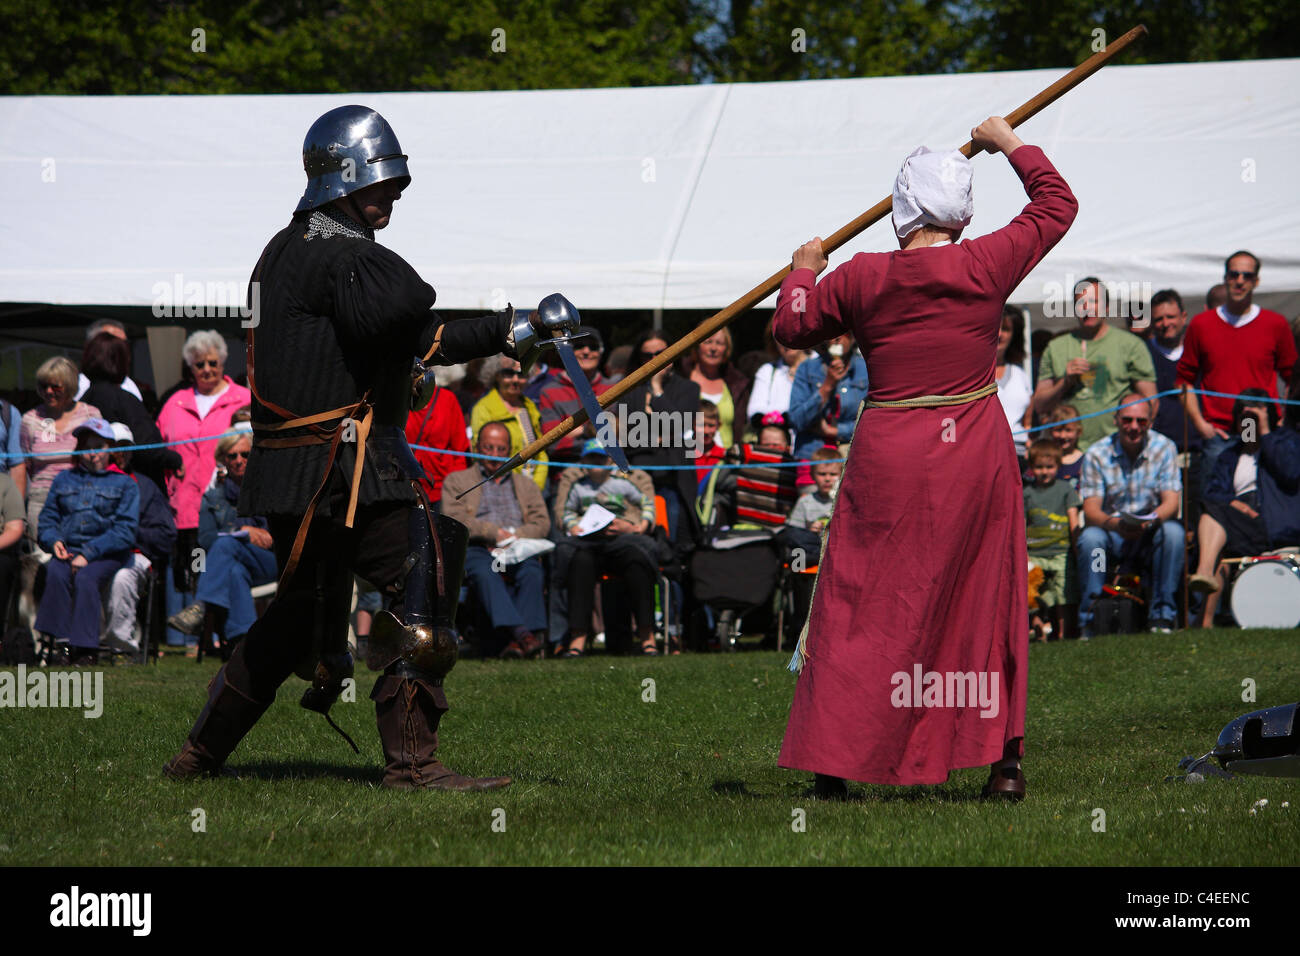 A battle re-enactment with a male knight and a female defending herself. Stock Photo